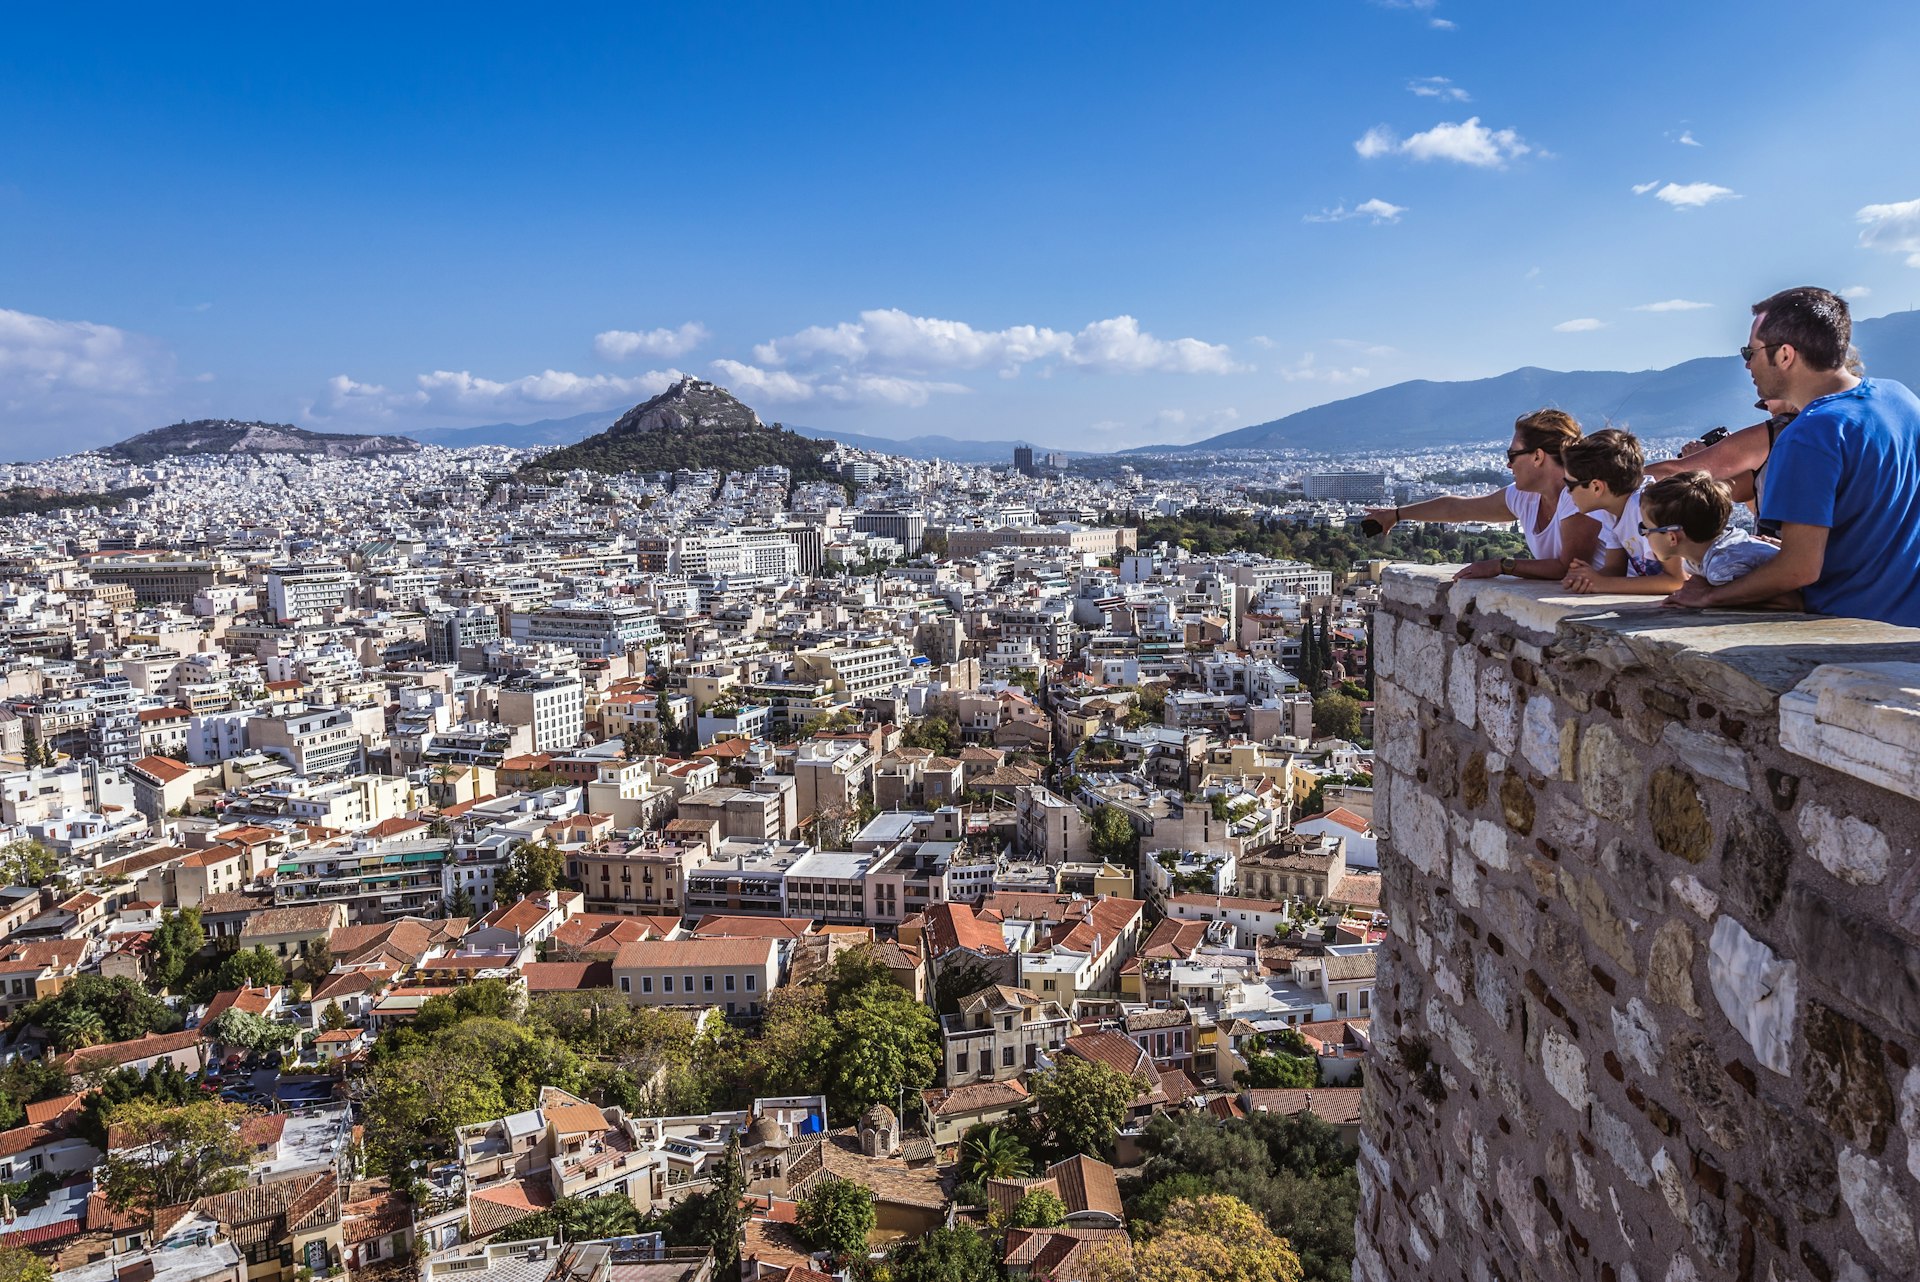 A family looks out on Lycabettus Mountain from a hill of the Acropolis citadel in Athens